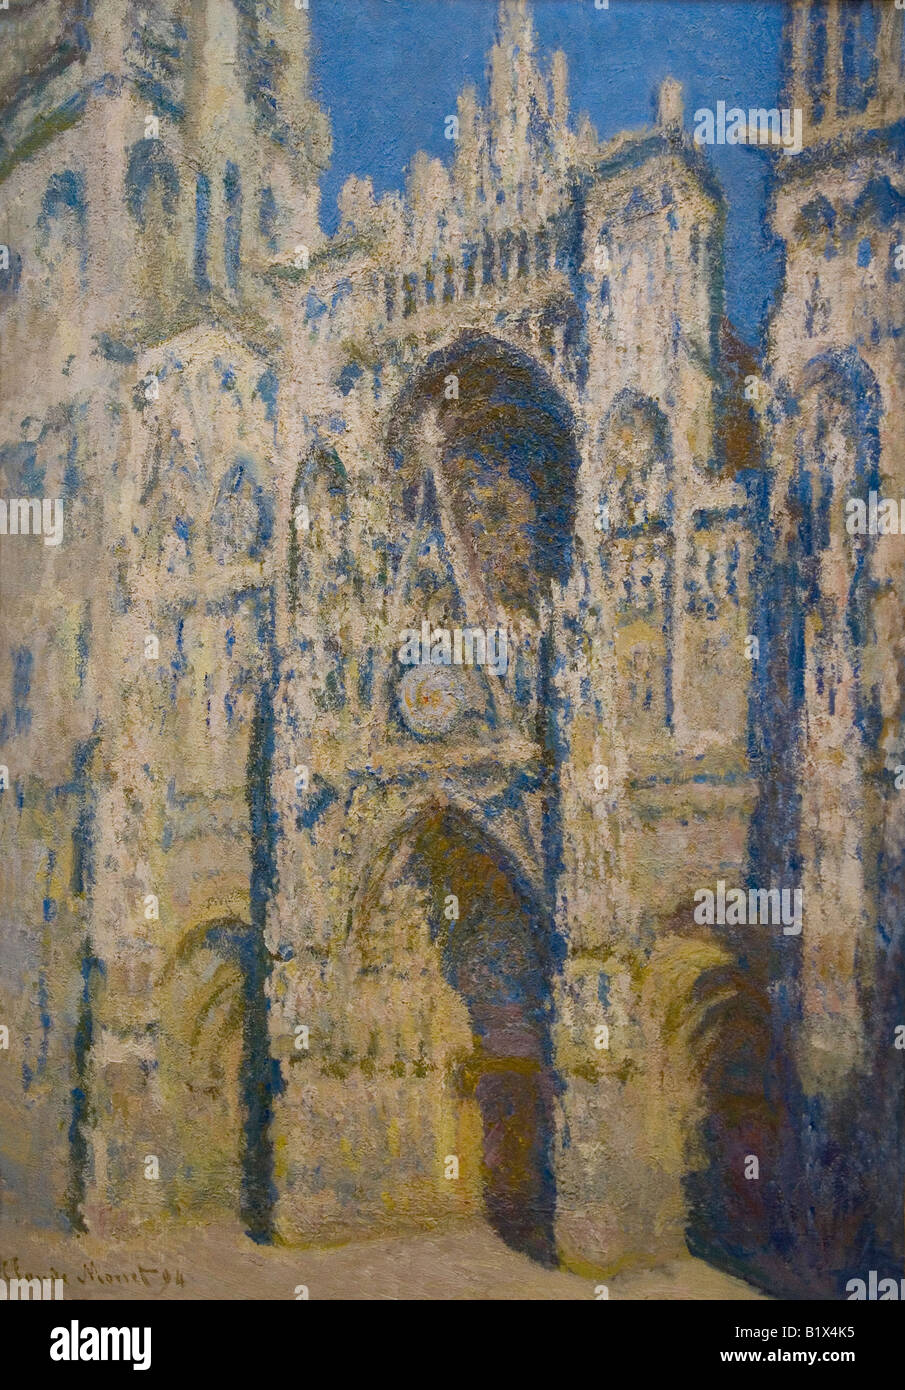 Rouen Cathedral main door and Saint Romain Tower full sun harmony of blue and gold by Claude Monet 1893 Musee D'Orsay Paris Stock Photo